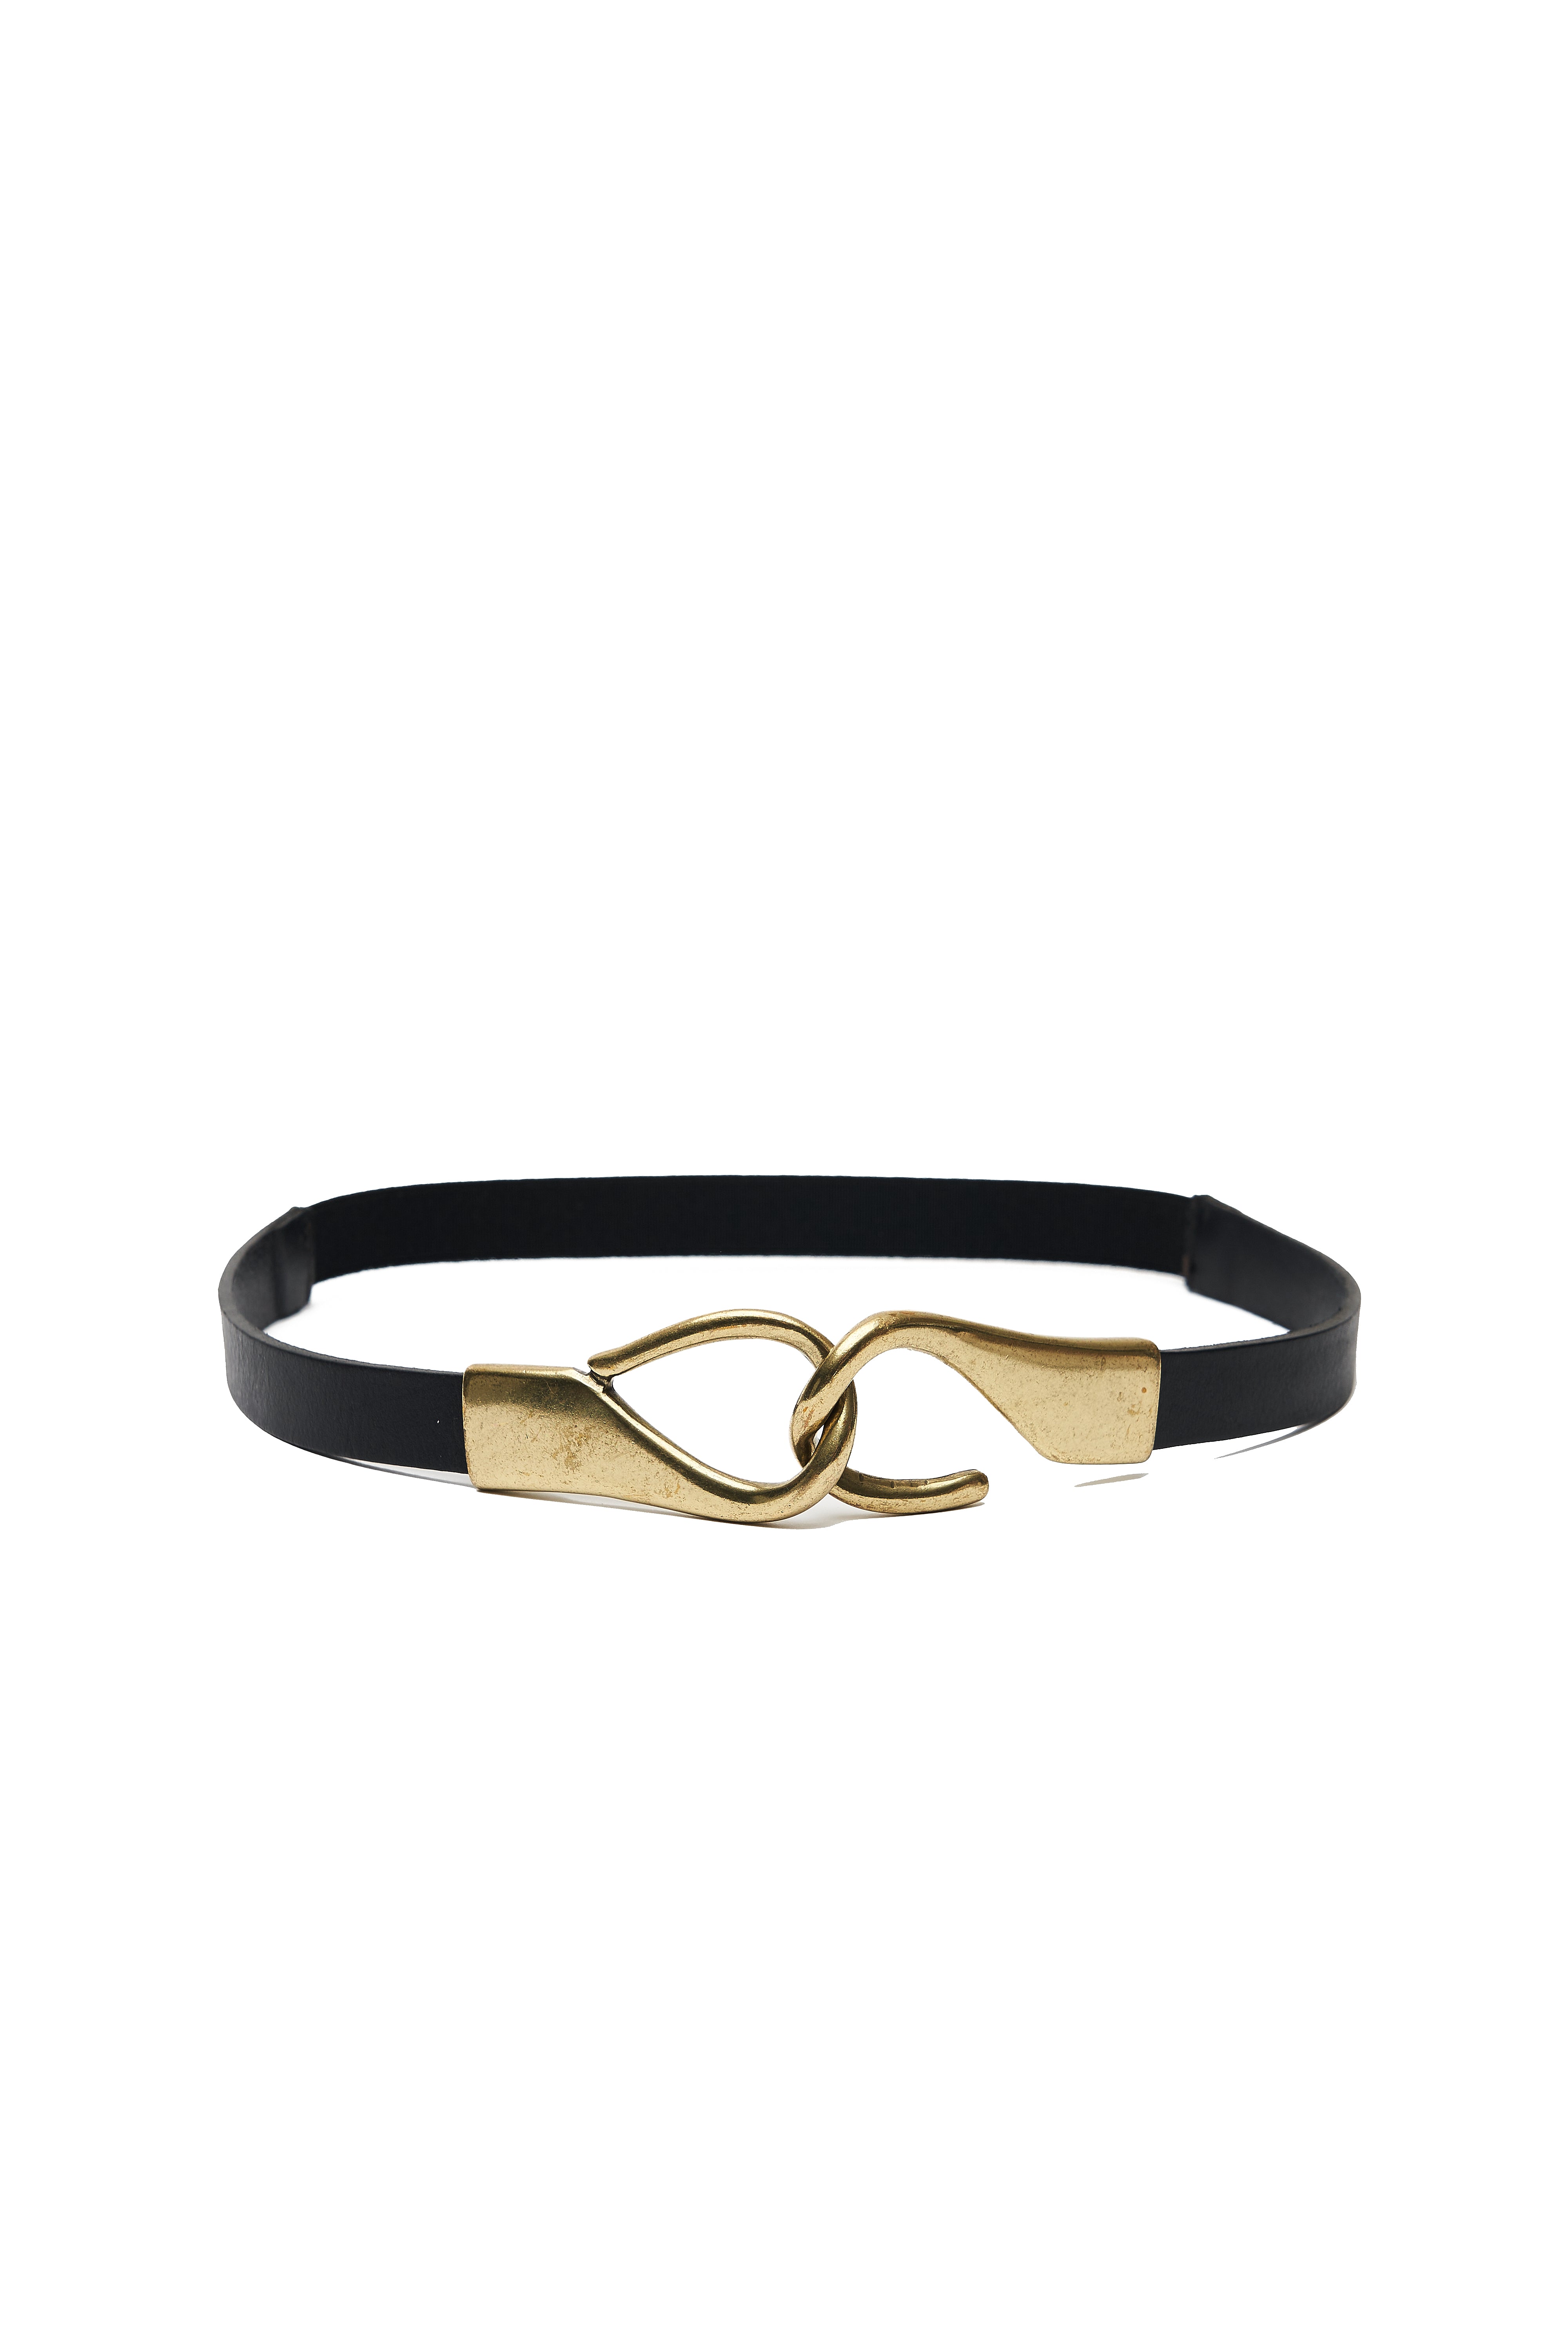 NARROW LEATHER BLACK BELT WITH GOLDEN BUCKLE